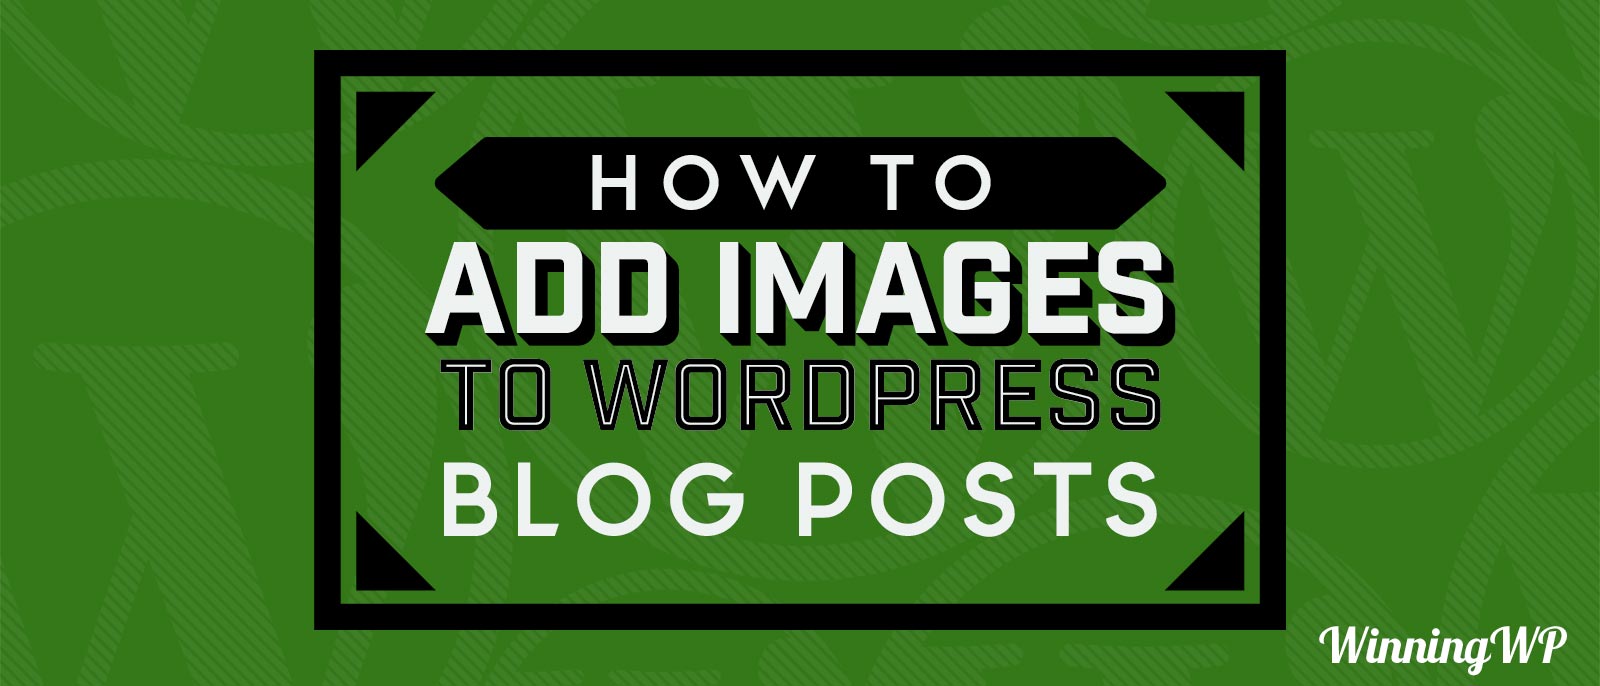 How to add images to WordPress